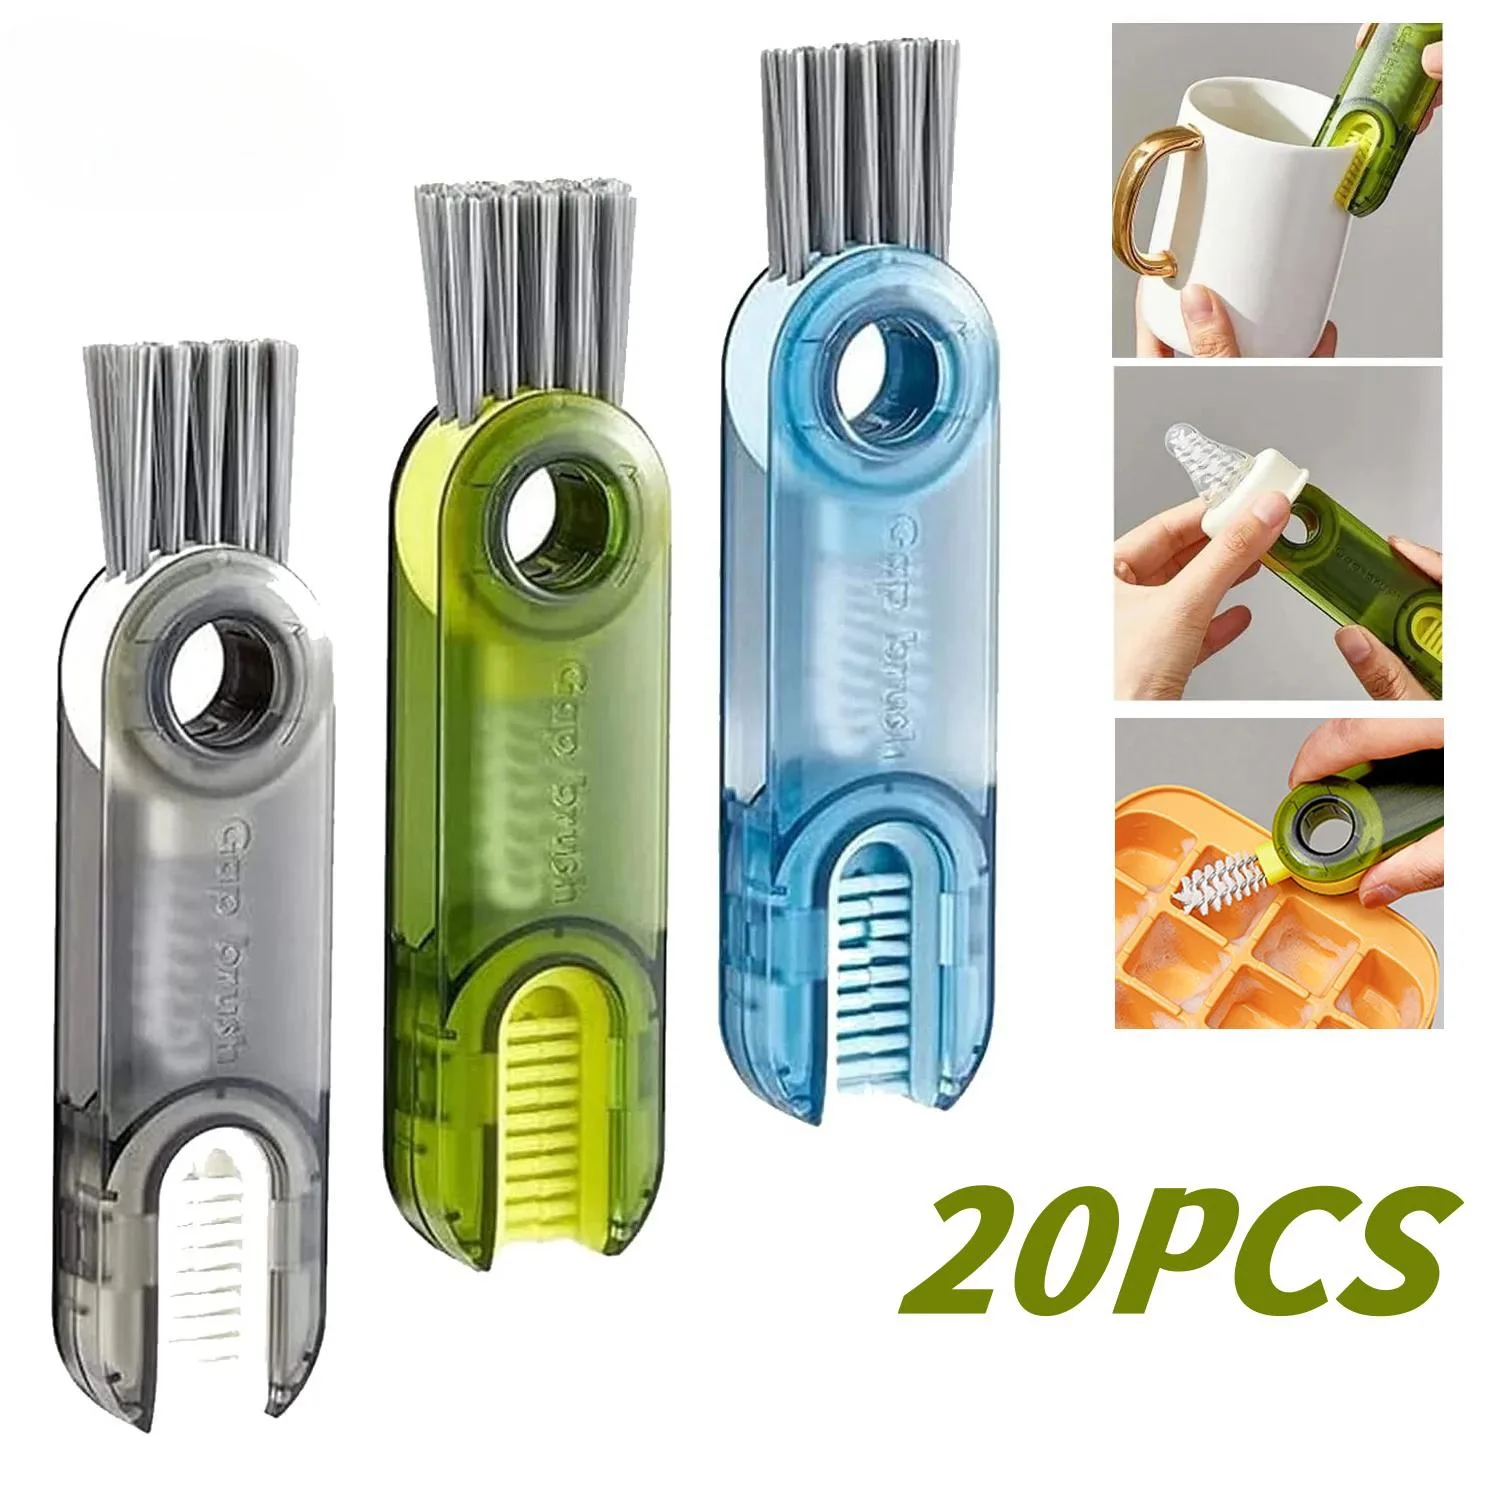 3 in 1 Bottle Gap Cleaner Brush Cup 1-2pcs Crevice Cleaning Brush Silicone  Bottle Mini Cleaner Home Kitchen Cleaning Accessories - AliExpress